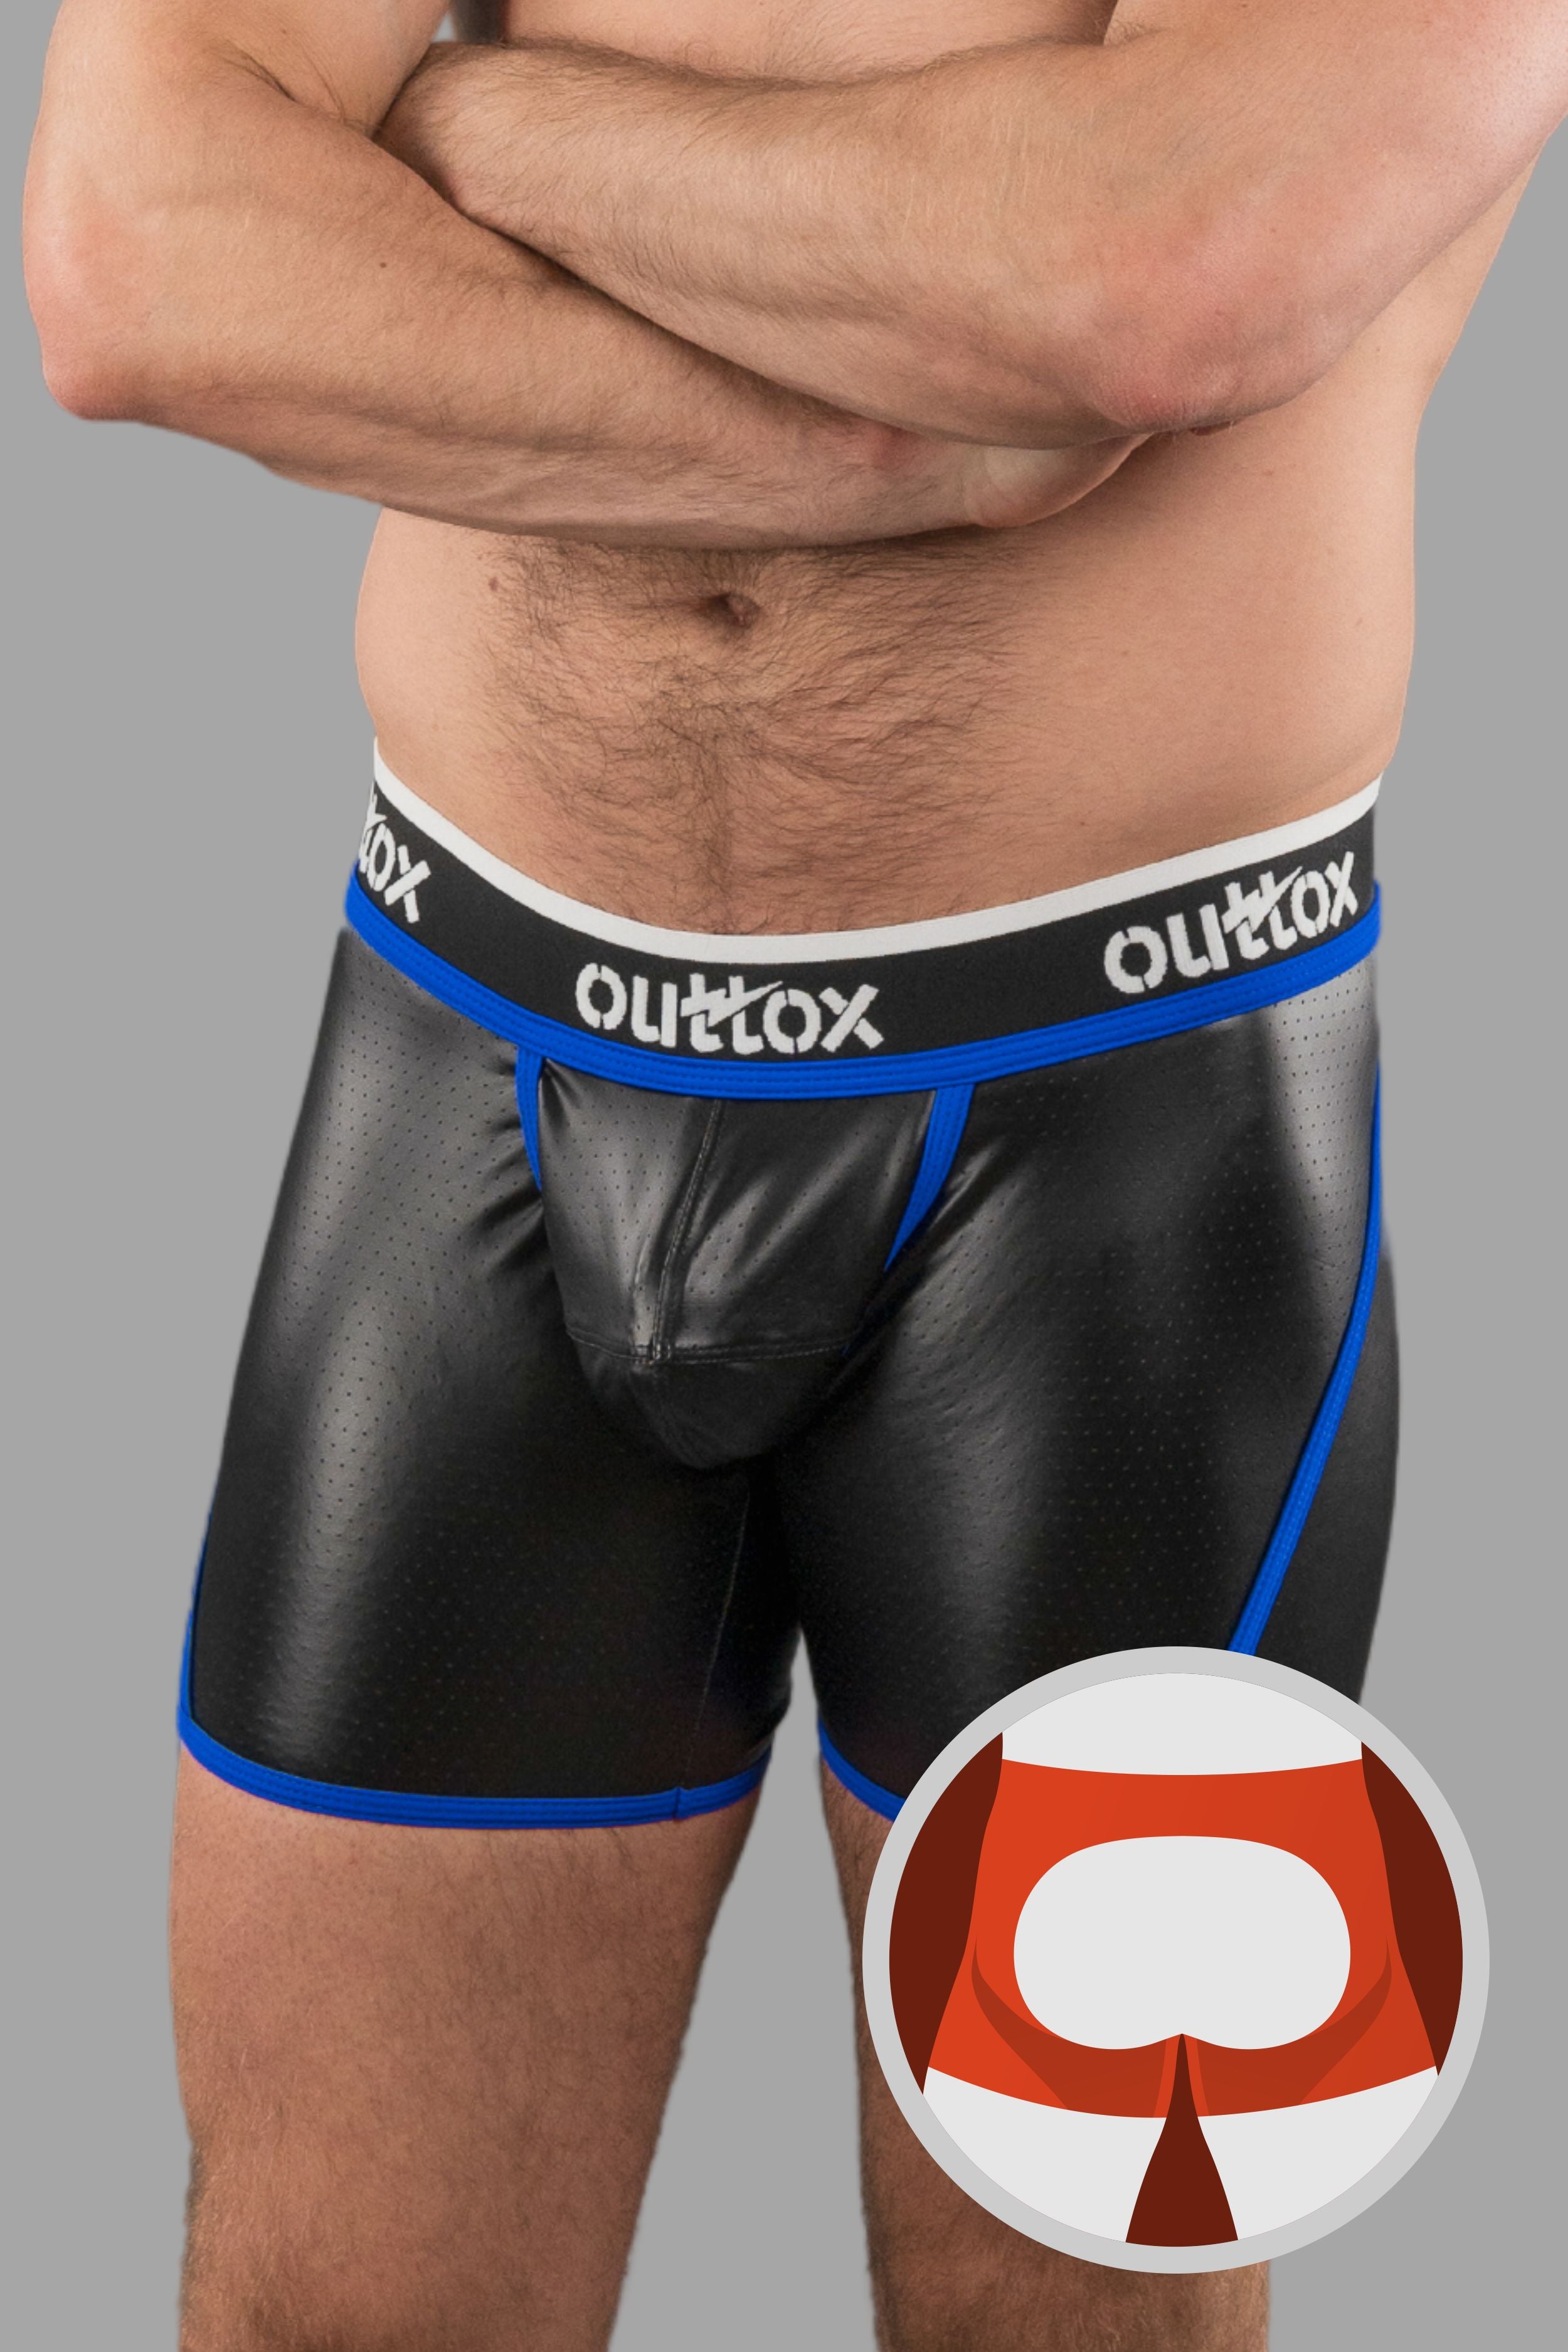 Outtox. Open Rear Shorts with Snap Codpiece. Black+Blue &